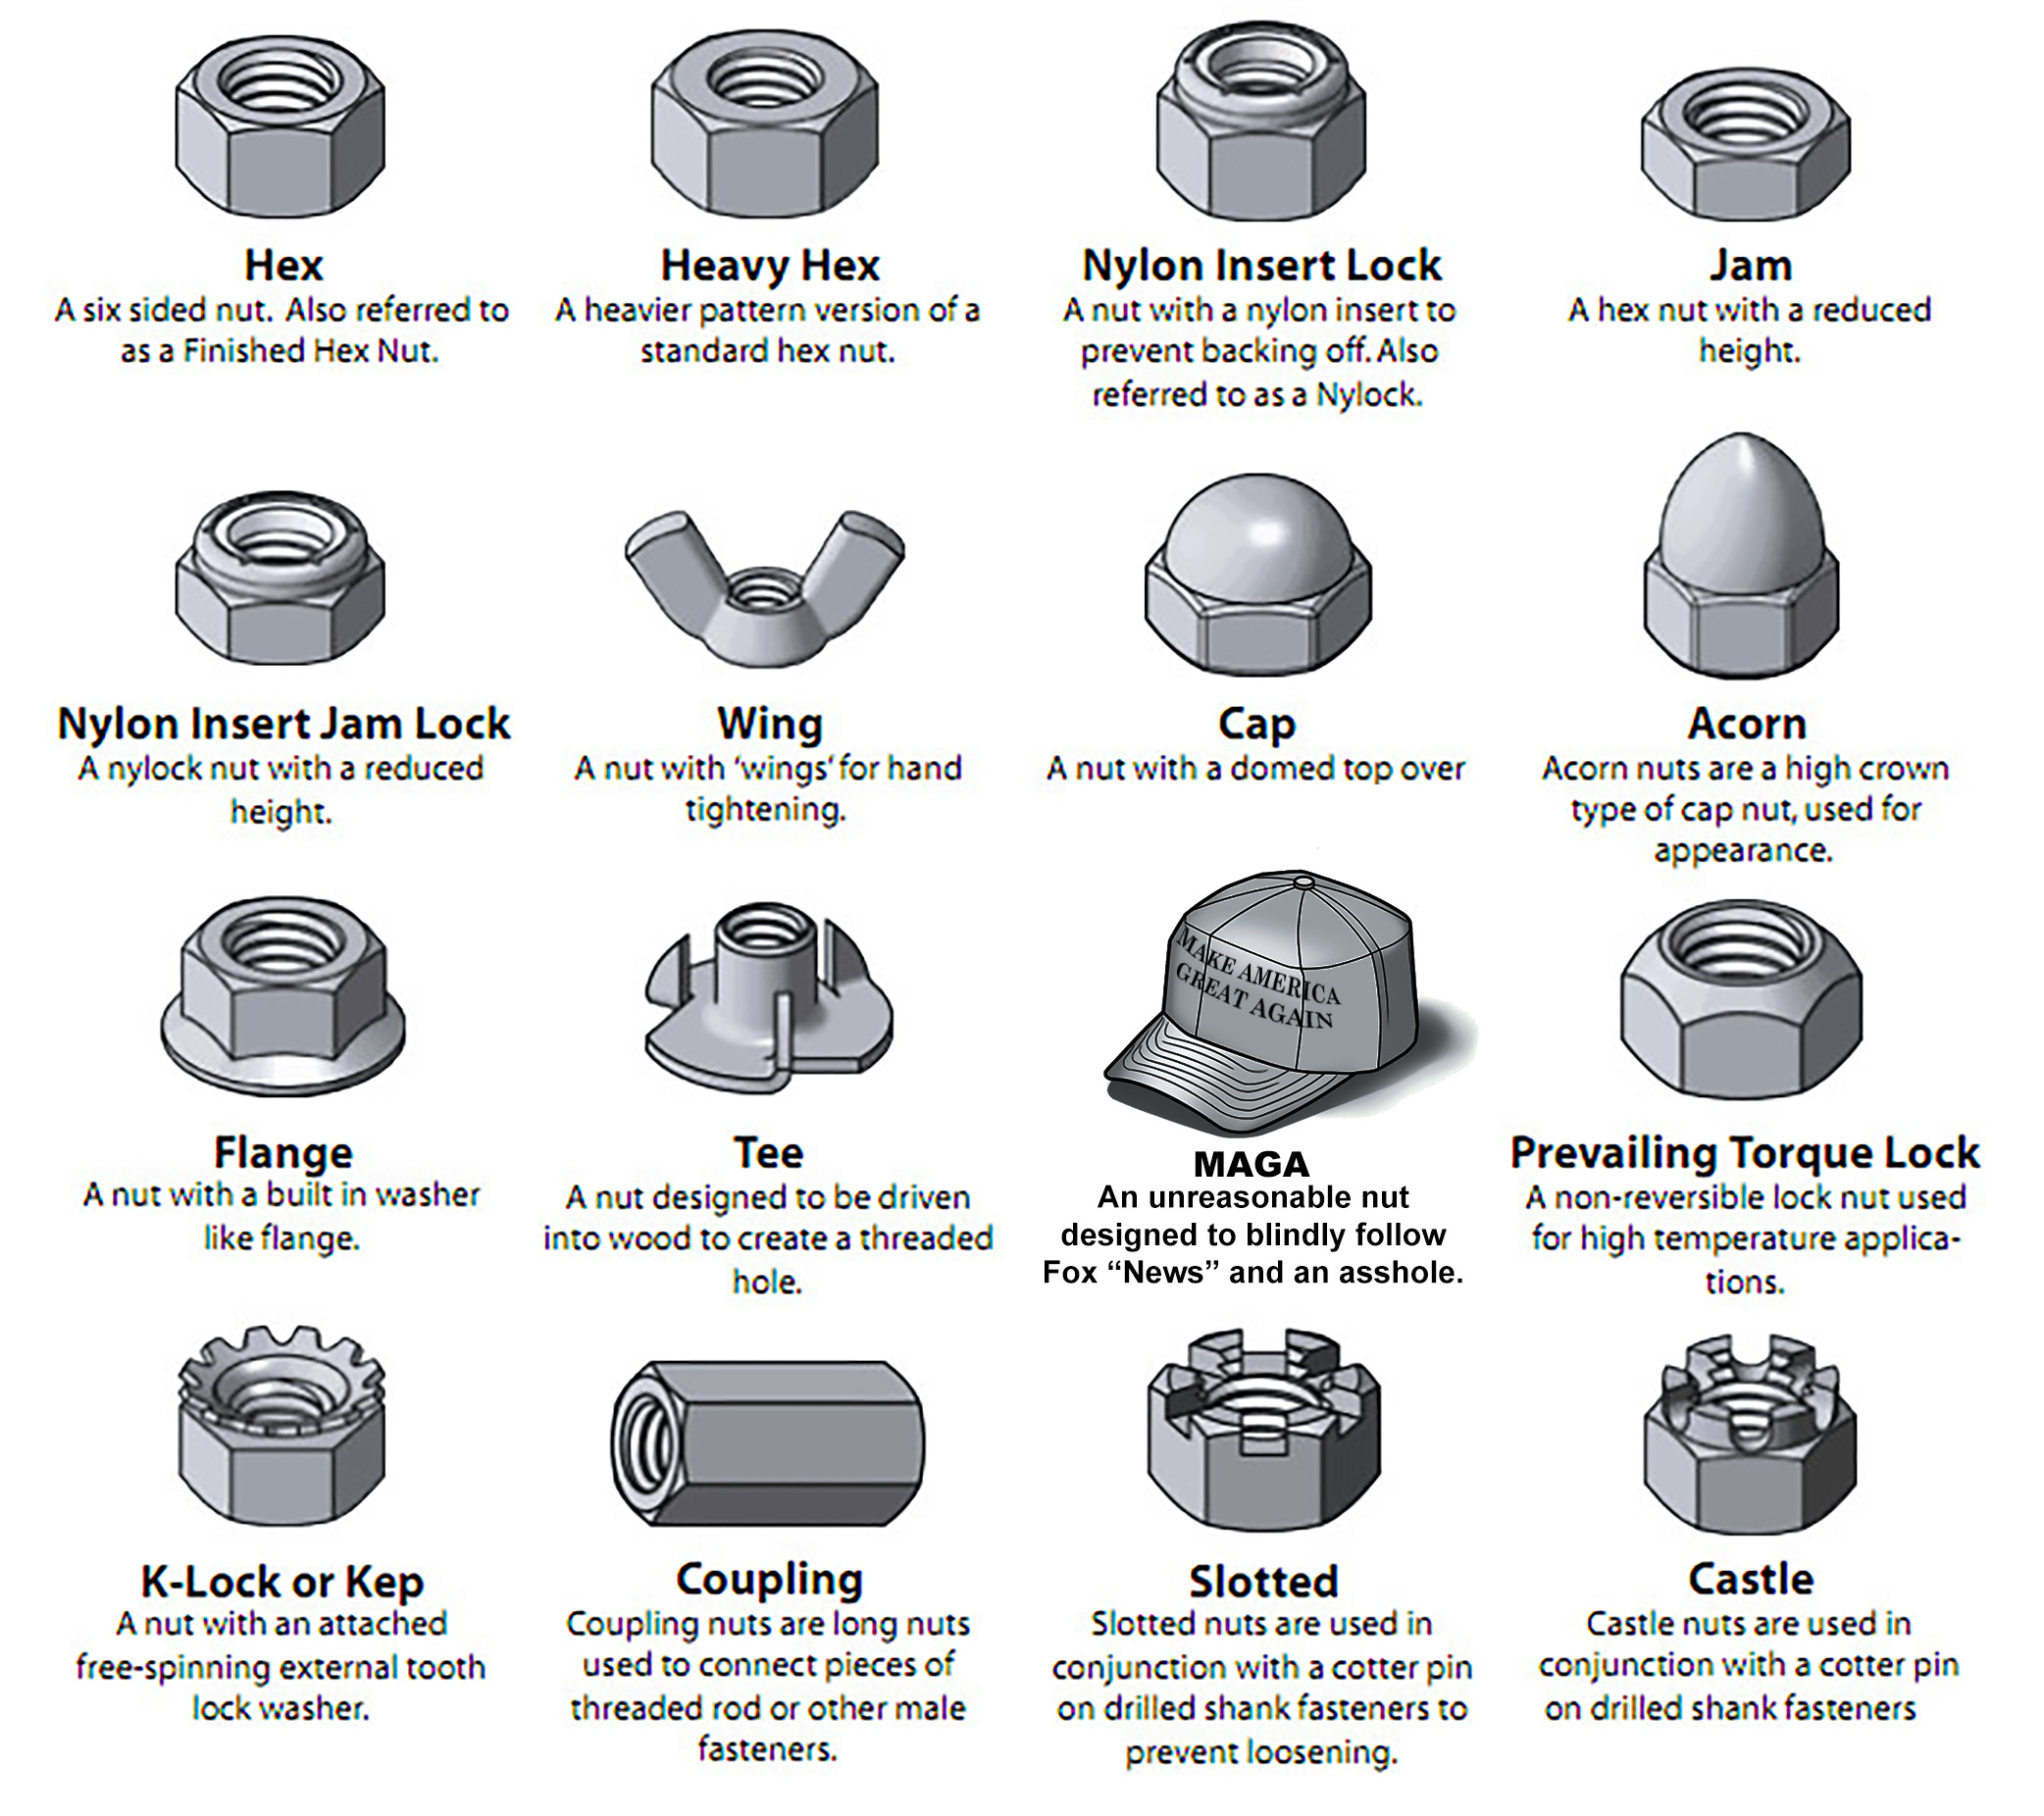 An informative illustration showing various types of nuts used in hardware, each labeled with its name and a brief description.